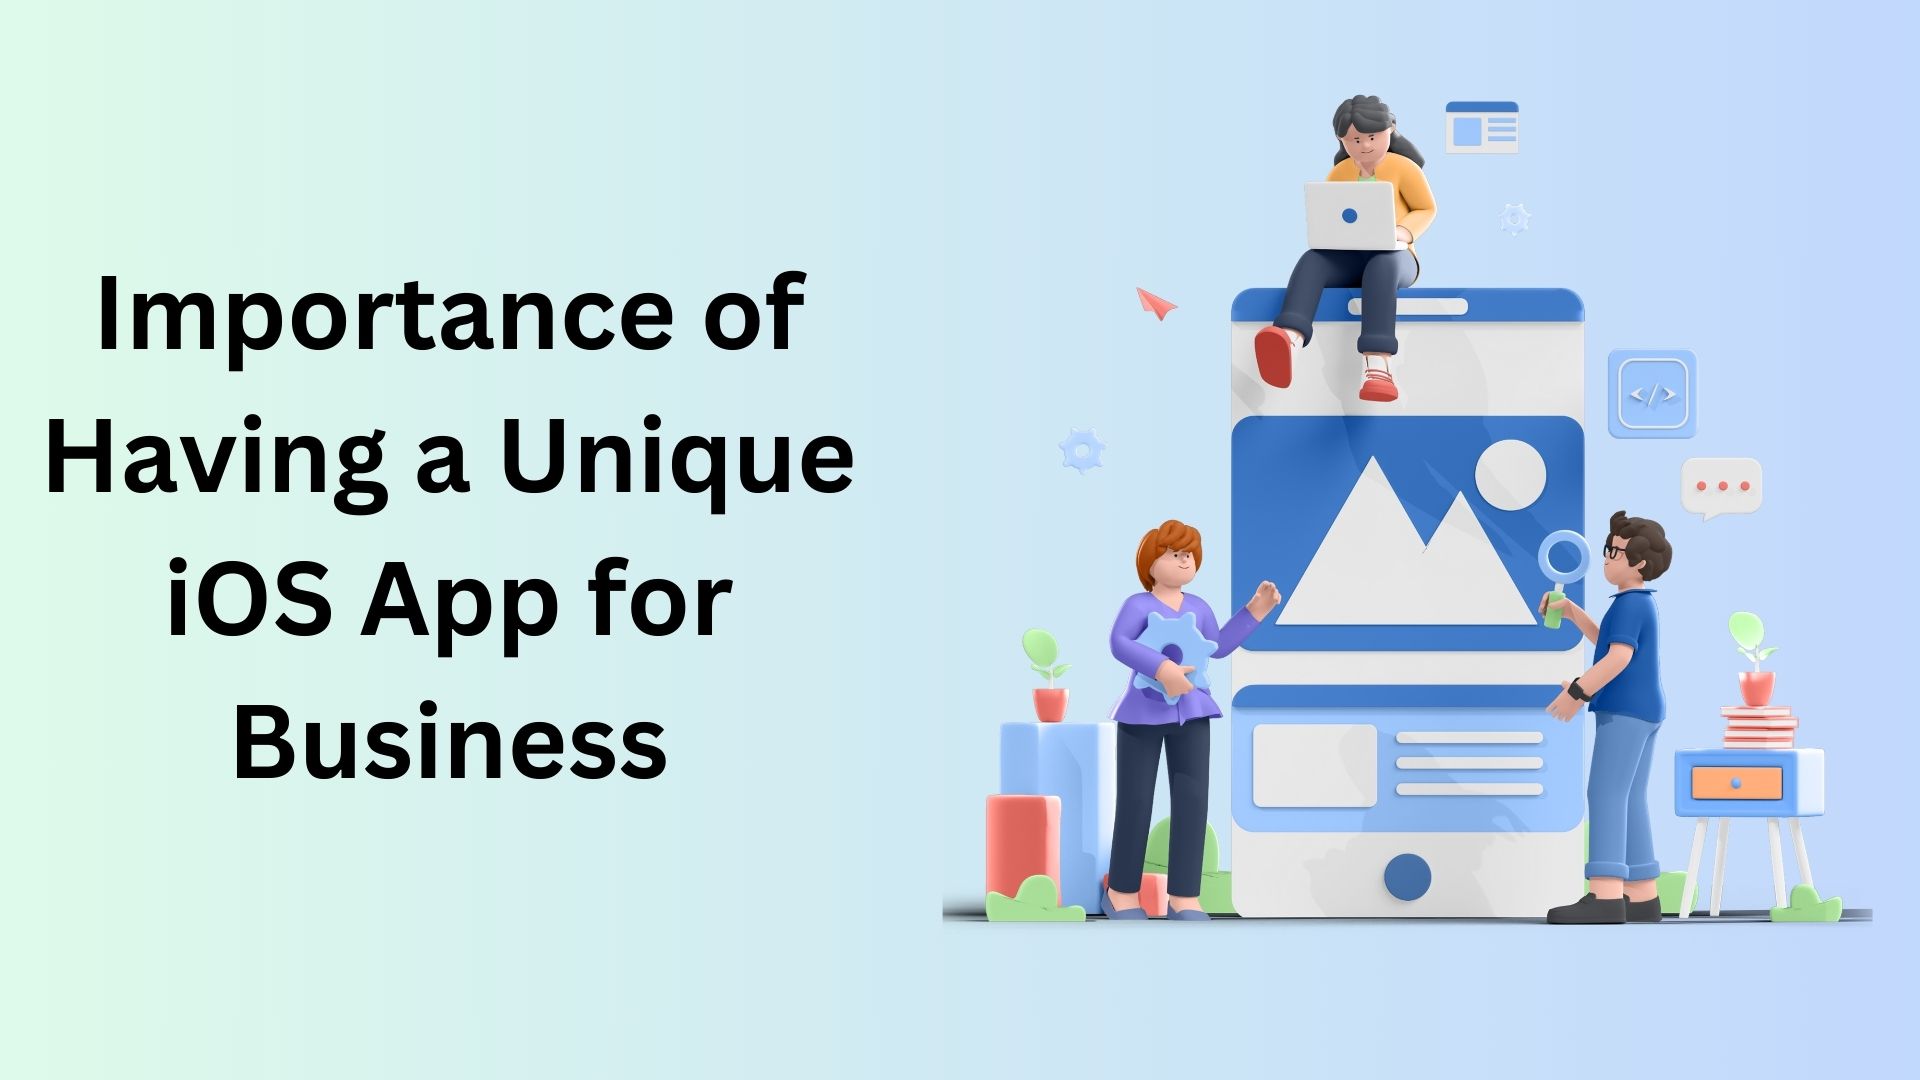 Importance of Having a Unique iOS App for Business